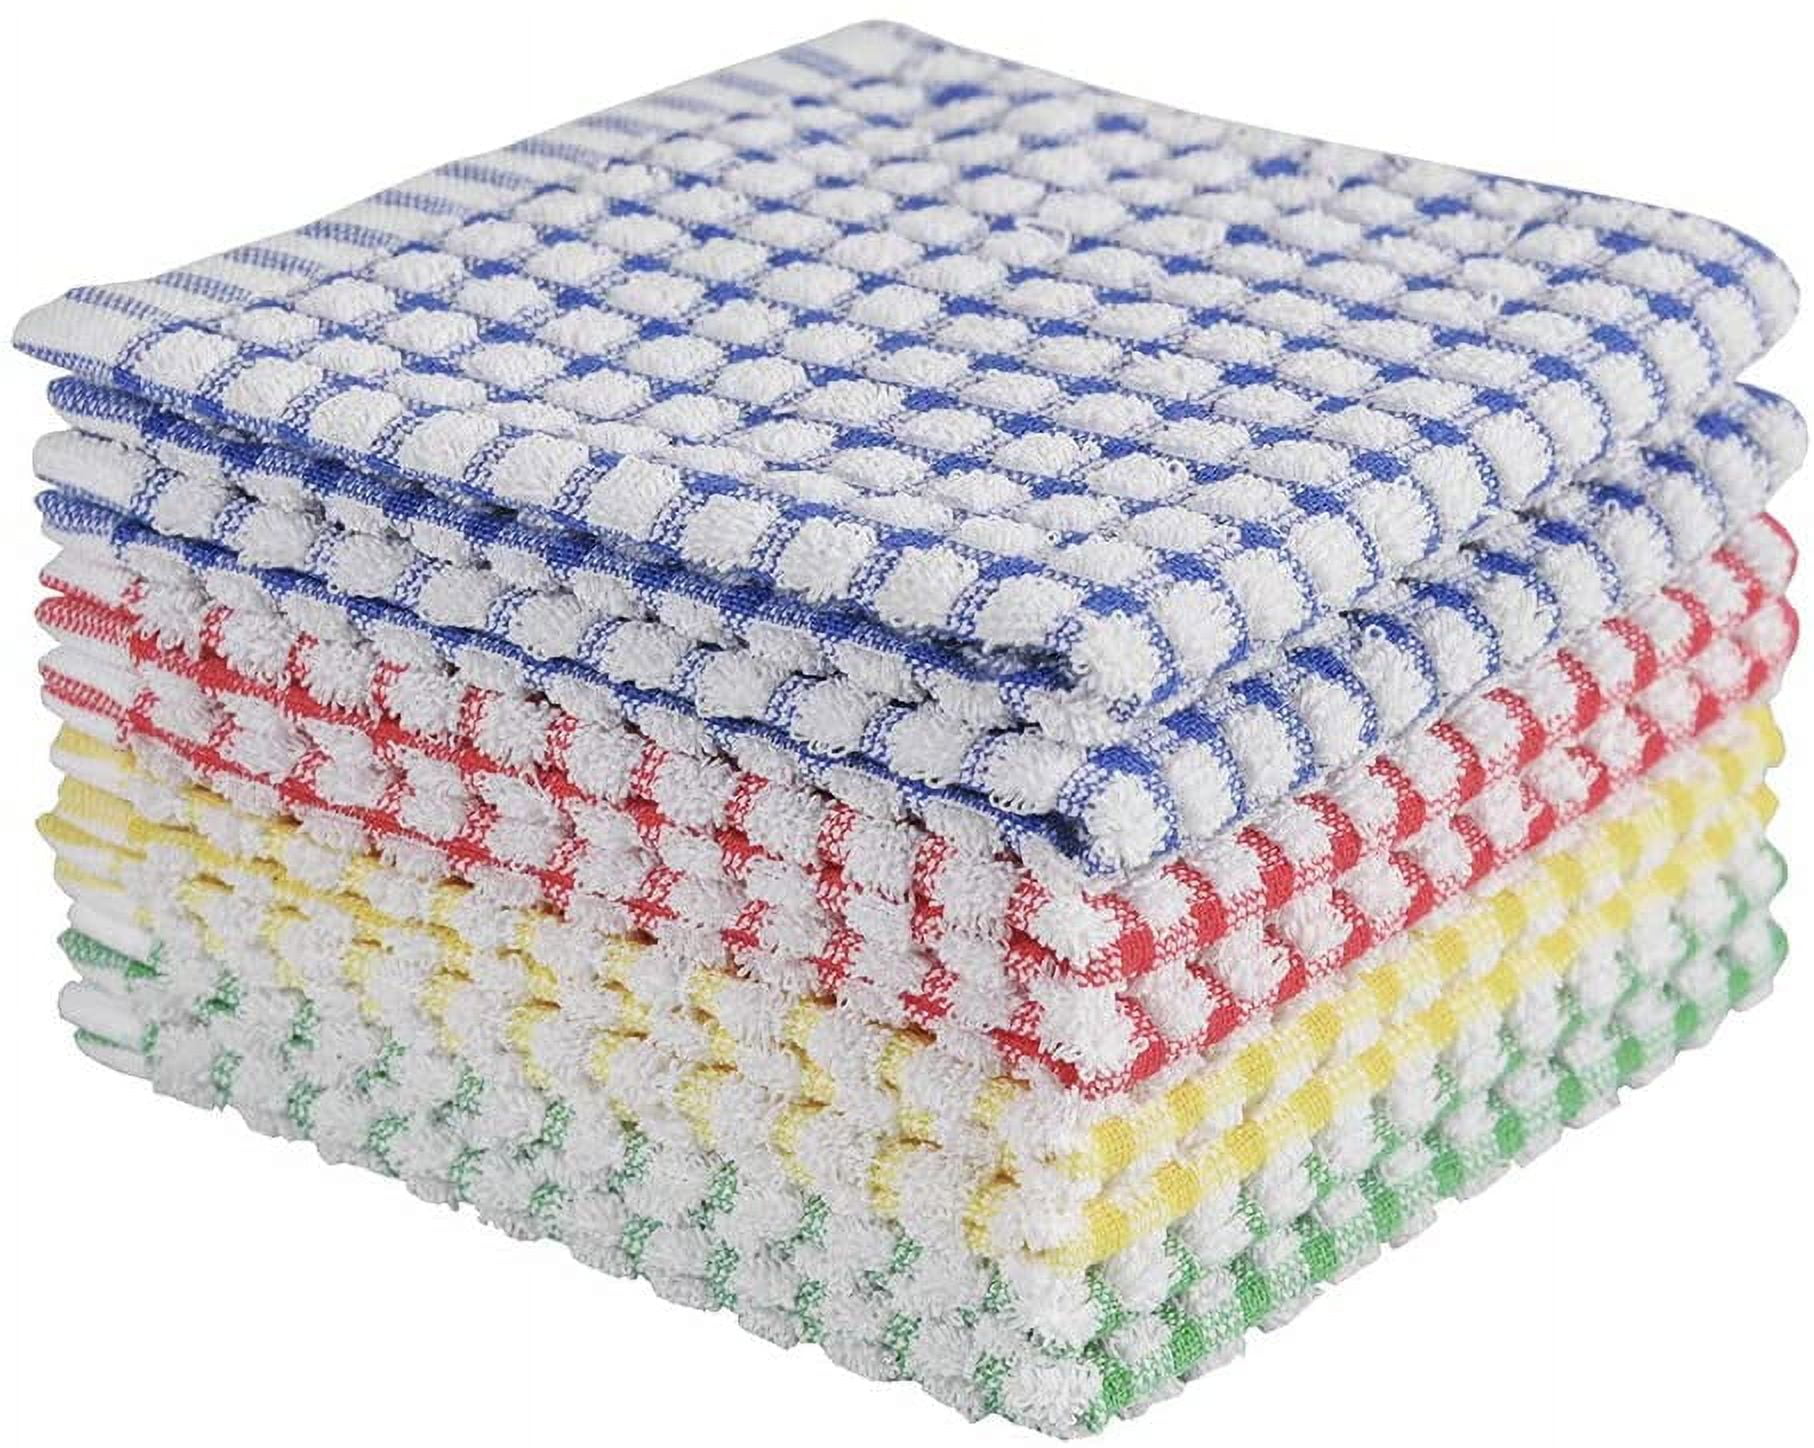 Oeleky Dish Cloths for Kitchen Washing Dishes, Super Absorbent Dish Rags,  Cotton Terry Cleaning Cloths Pack of 8, 12x12 Inches Mix- Inch (Pack of 8)